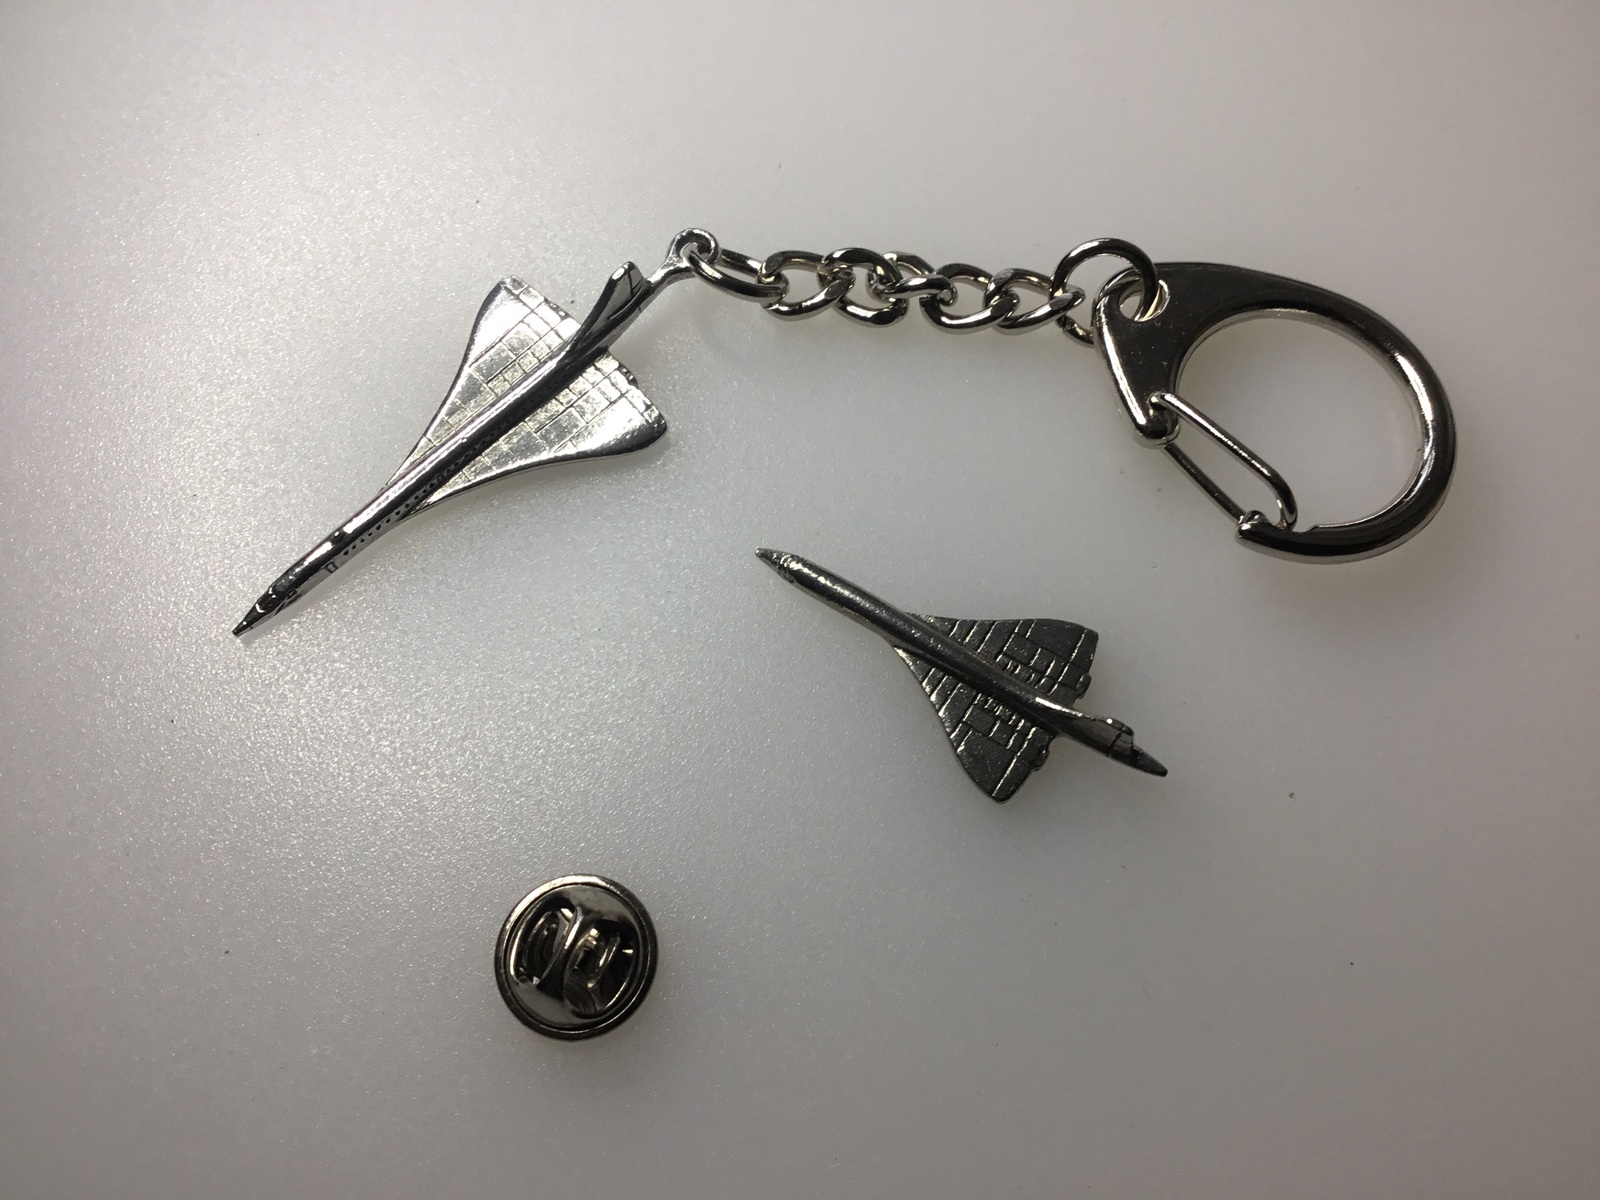 Concorde 50th Anniversary Pewter Lapel Pin Badge And Keyring Set Handmade In UK - $9.99